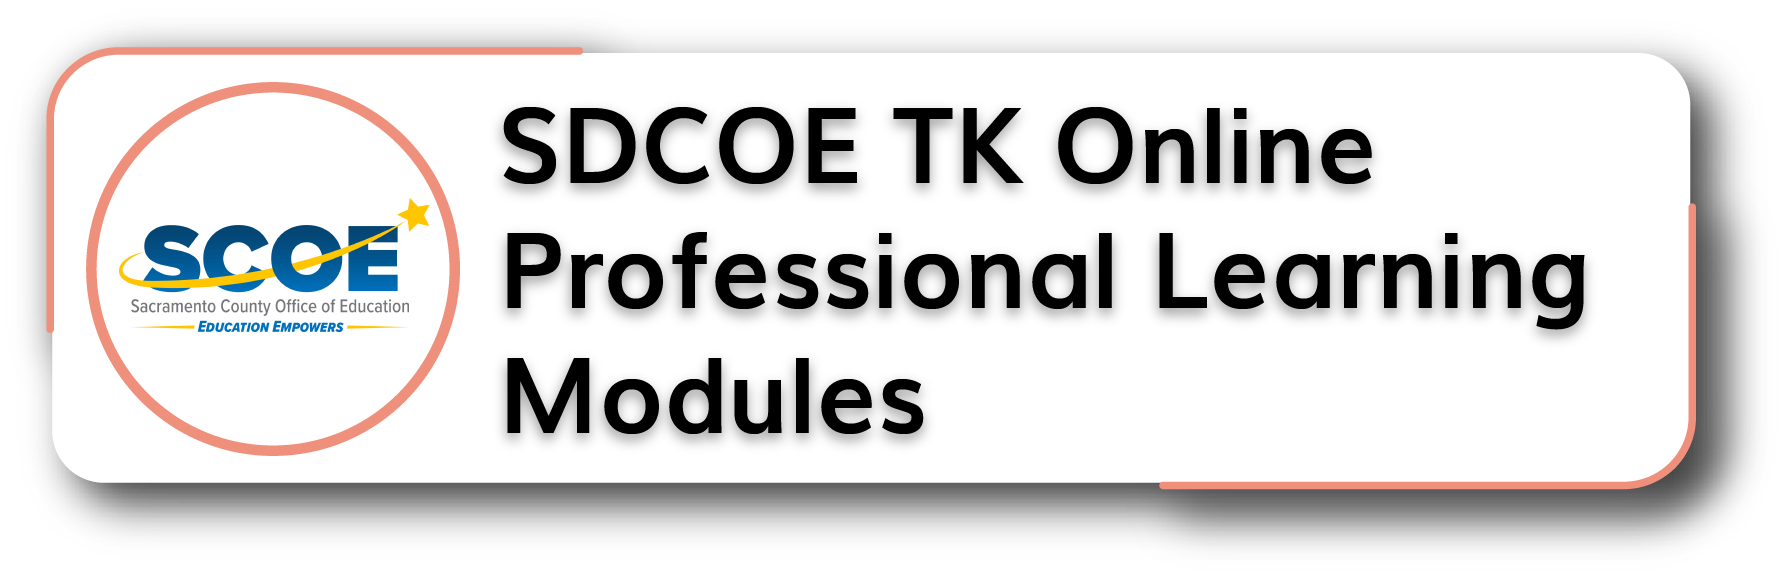 SDCOE TK Online Professional Learning Modules Button